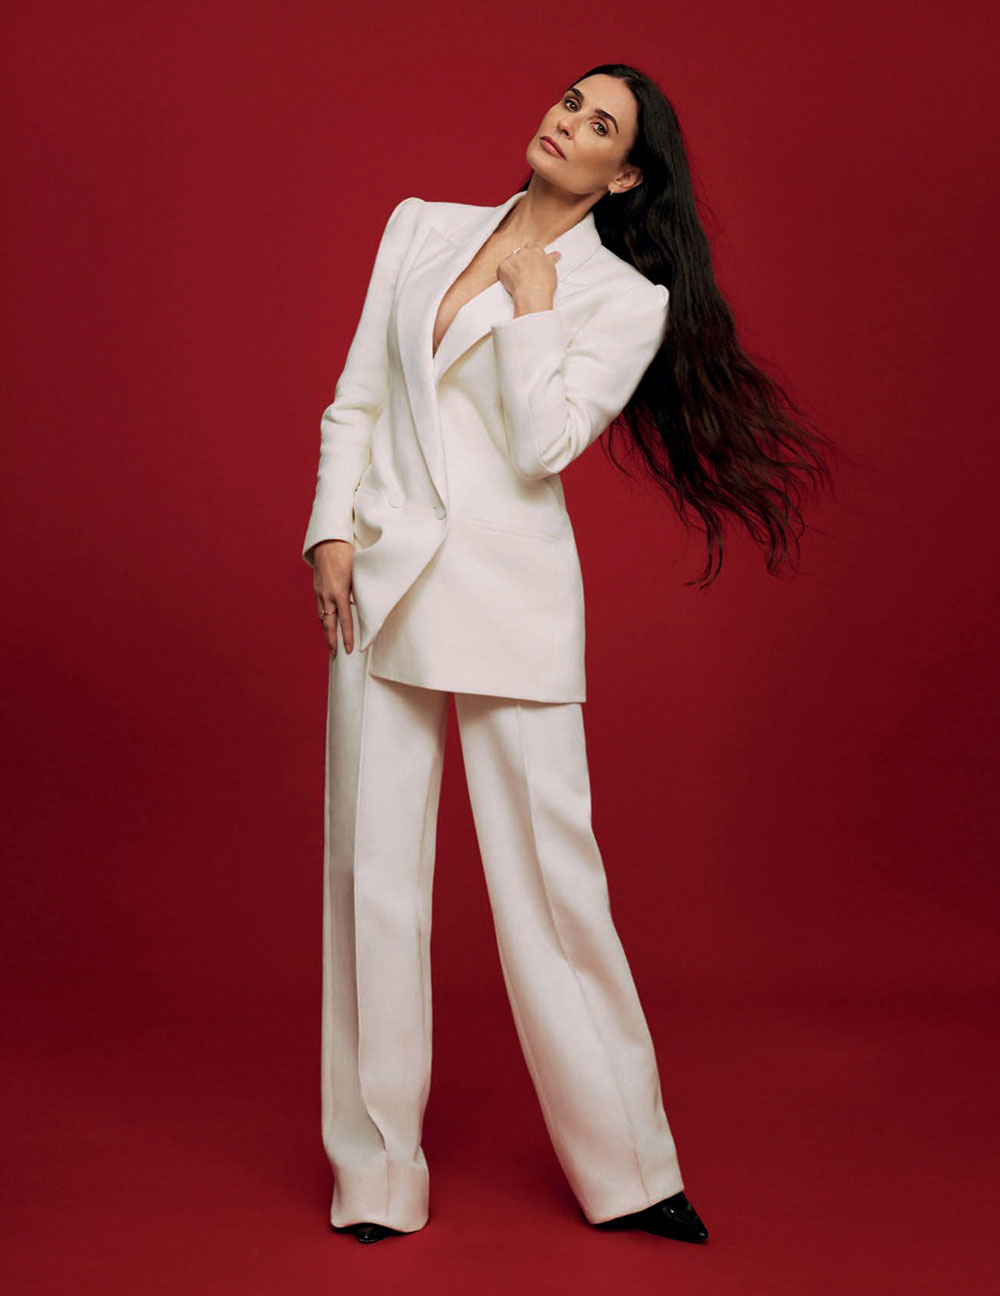 Demi Moore by Thomas Whiteside for Vogue Spain May 2020